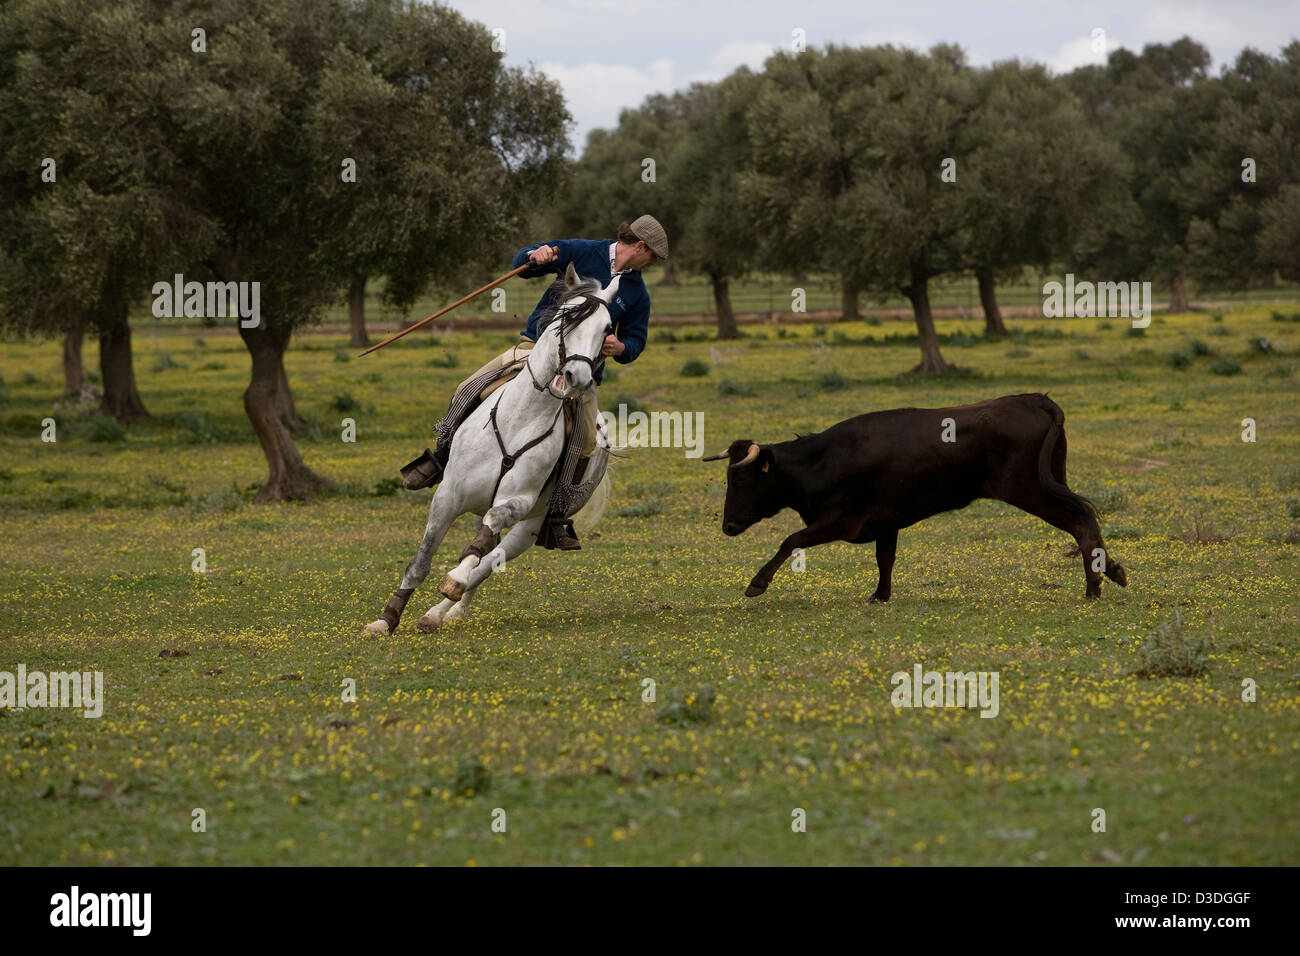 JEREZ DE LA FRONTERA,  SPAIN, 22nd FEBRUARY 2008: Antonio Domecq, 37, a rejoneador or bullfighter on horseback, rides his horse in a tight circle around a two year old cow at a 'Acorso y Derribo' event on one of his uncle Alvaro Domecq's farms.  Here riders tests young cows for their agression and train horses for the specialised dressage they need to be able to dance around fully grown four year old bulls in the bullring. Stock Photo